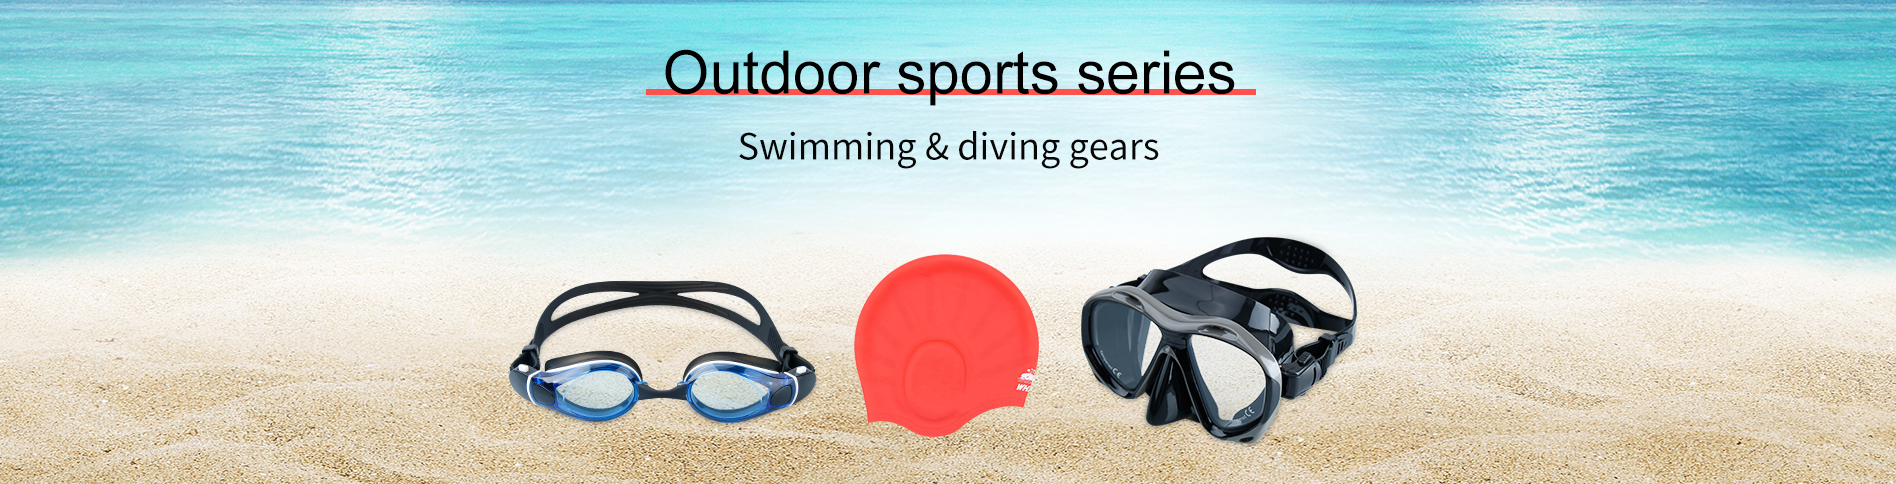 Swimming goggles, swimming mask, diving equipment